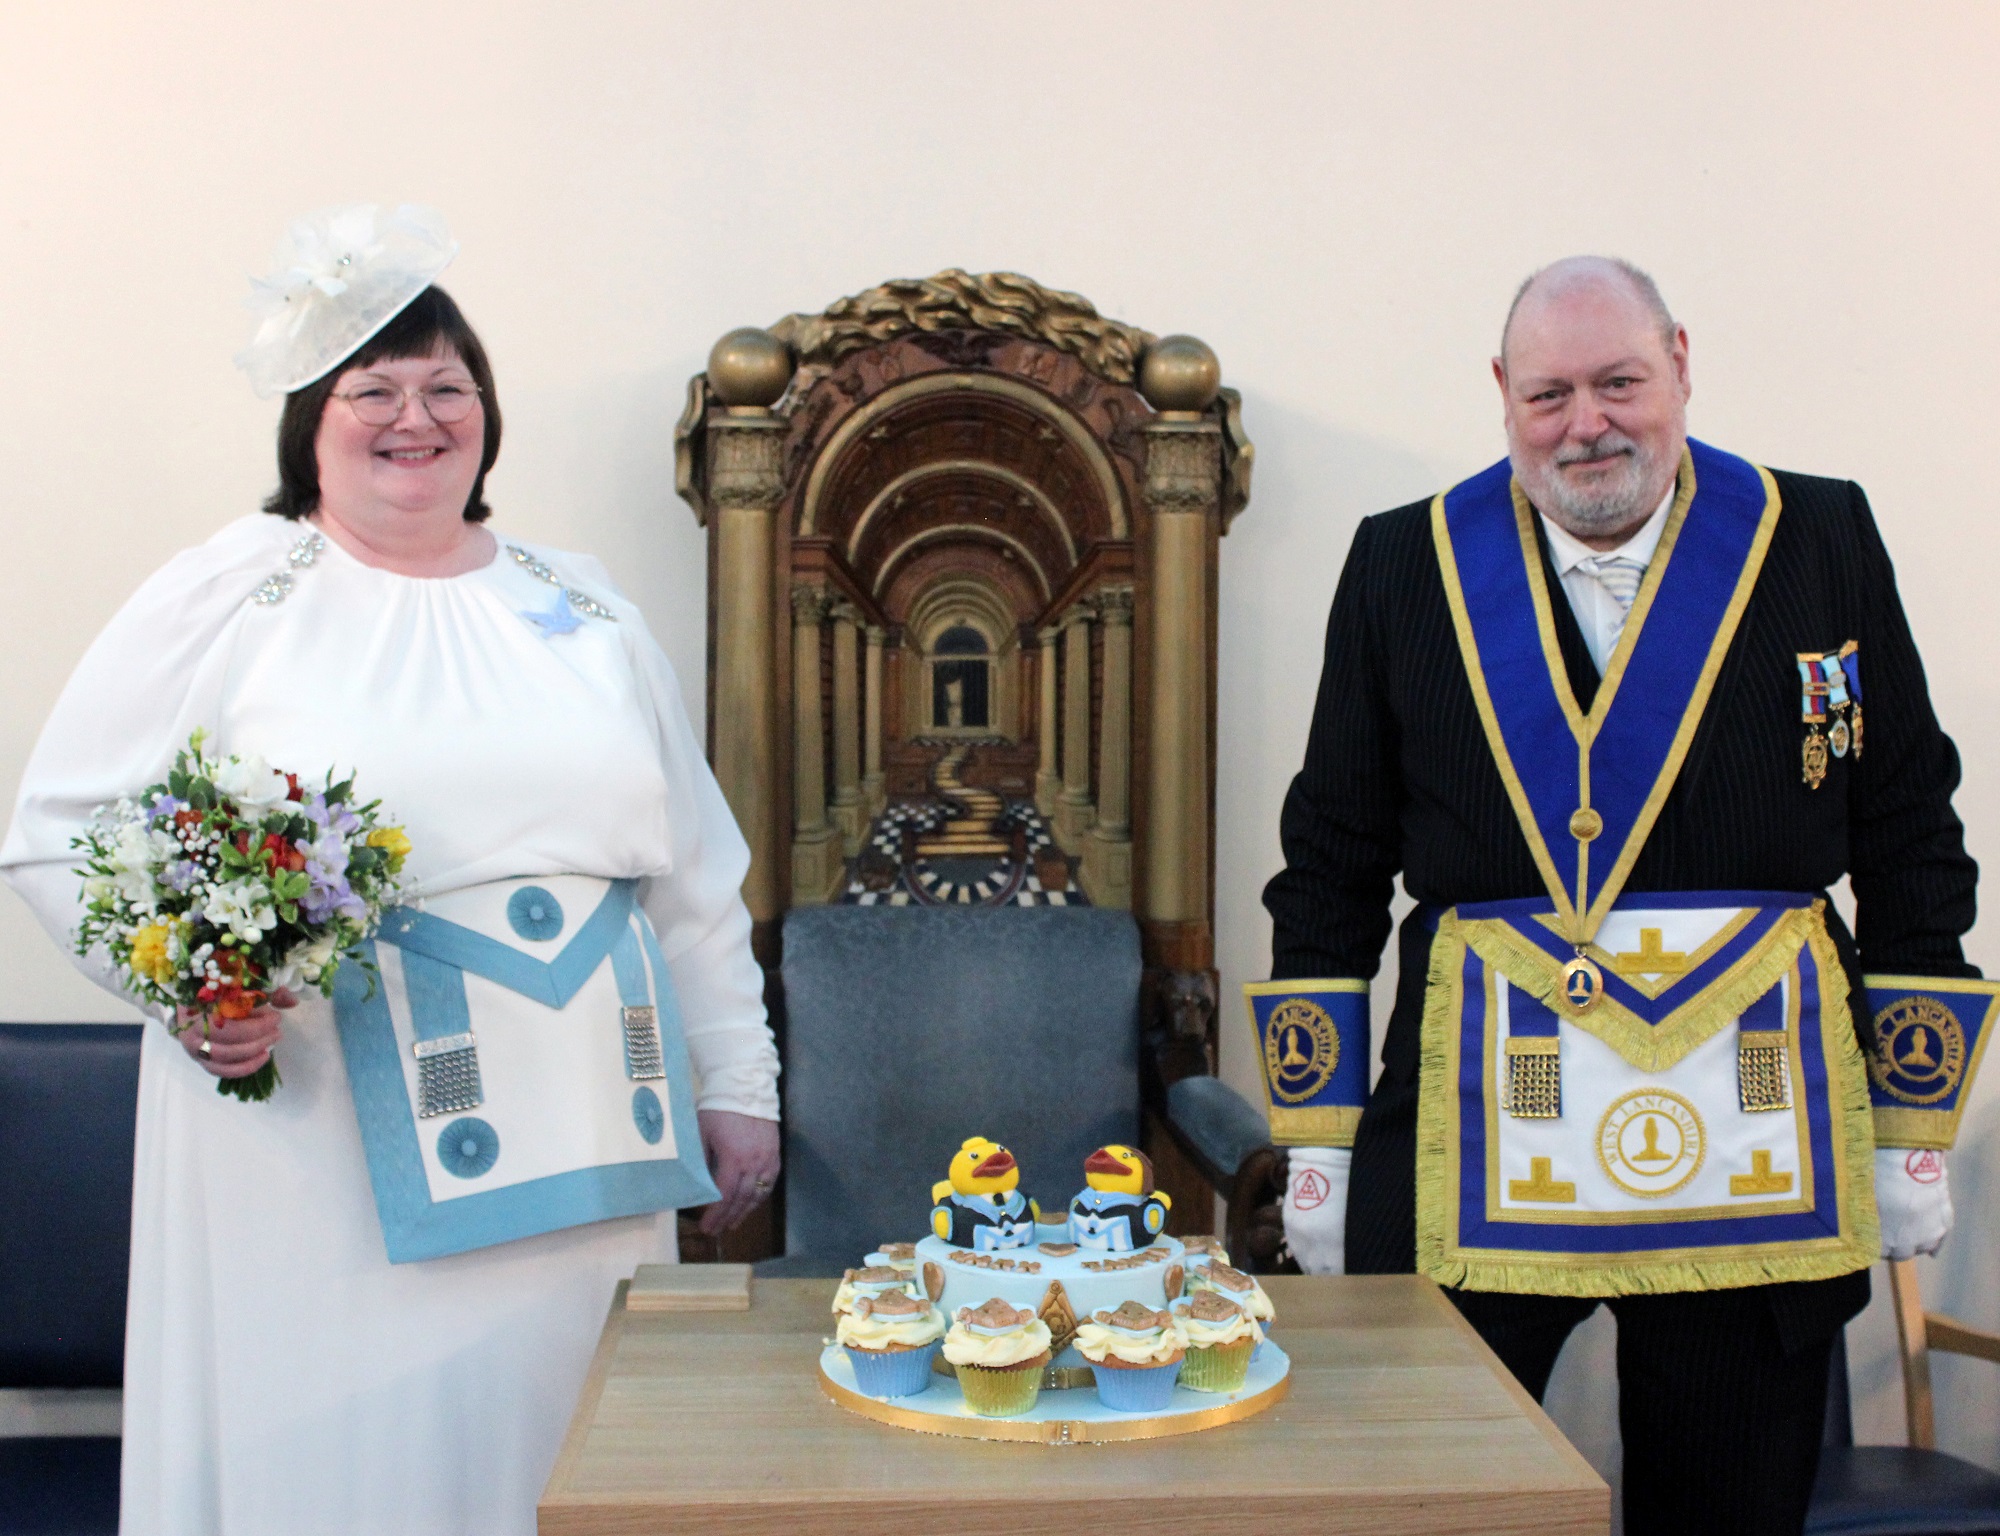 Mark and Tanya on their wedding day, both dressed in their Masonic regalia